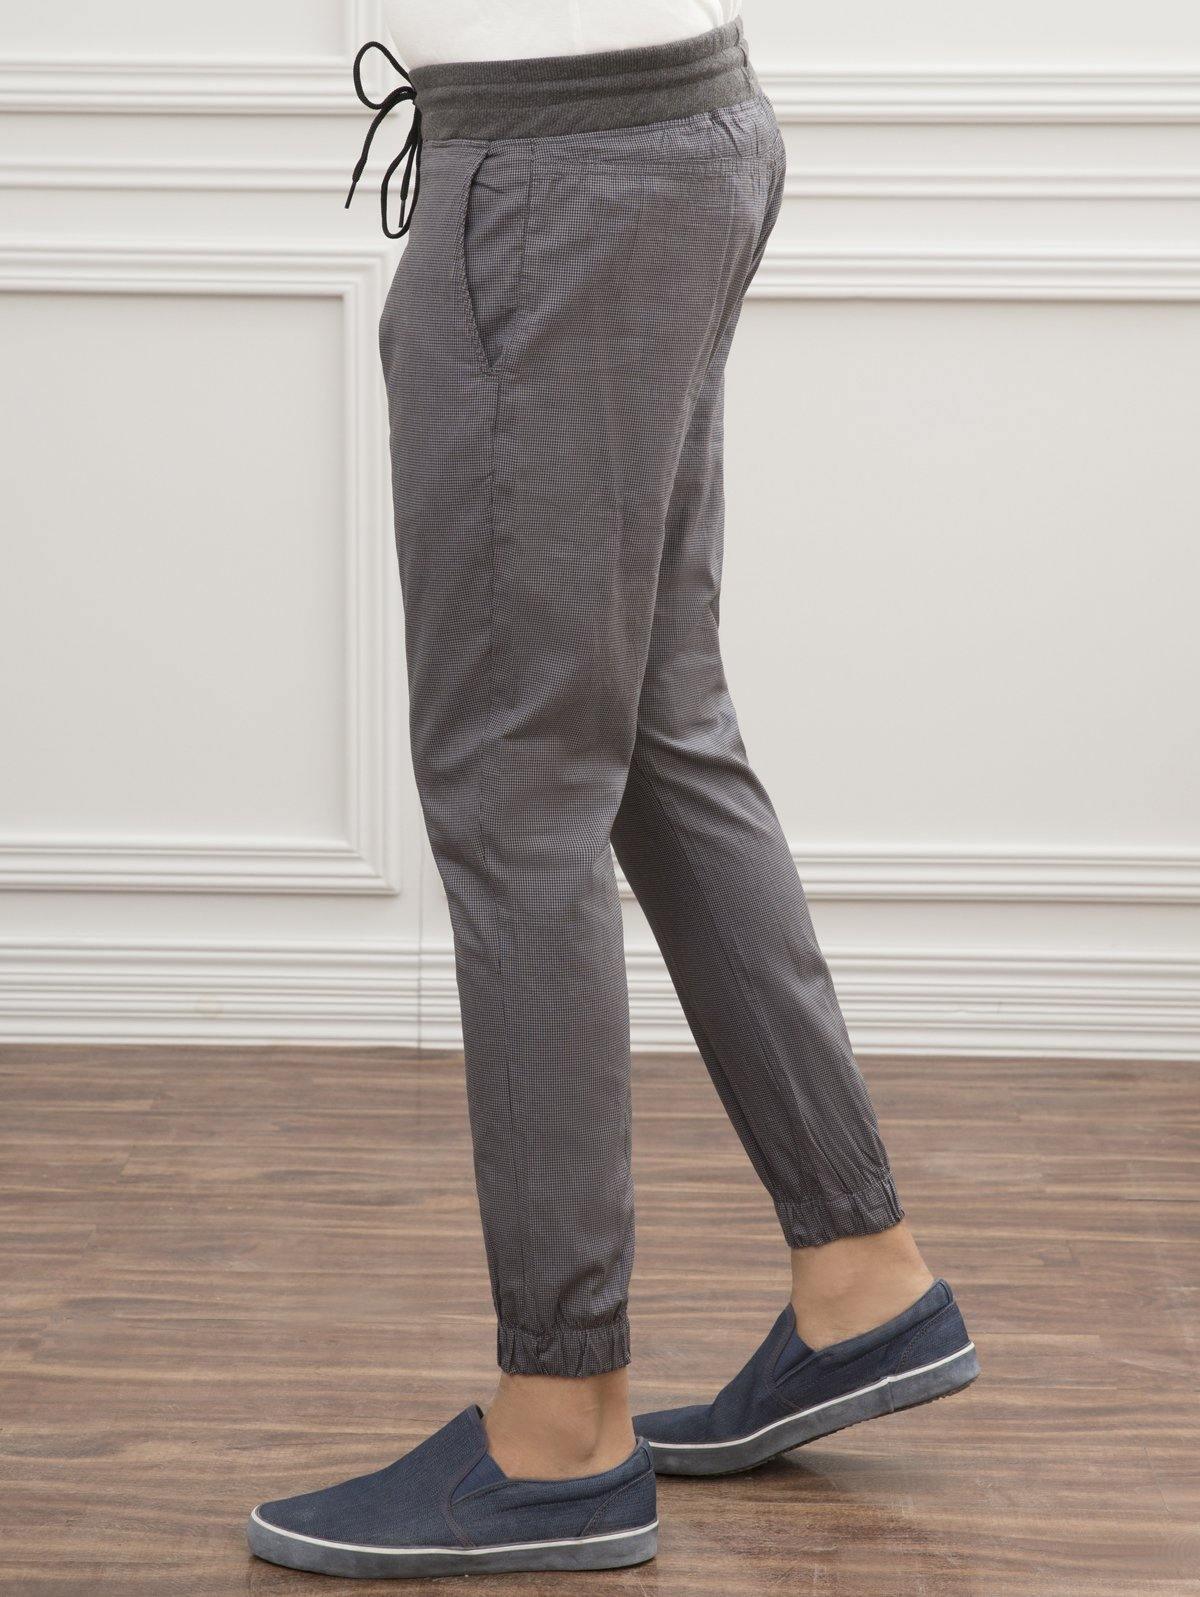 SELF CHECK SLIM FIT TROUSER GREY BLACK at Charcoal Clothing